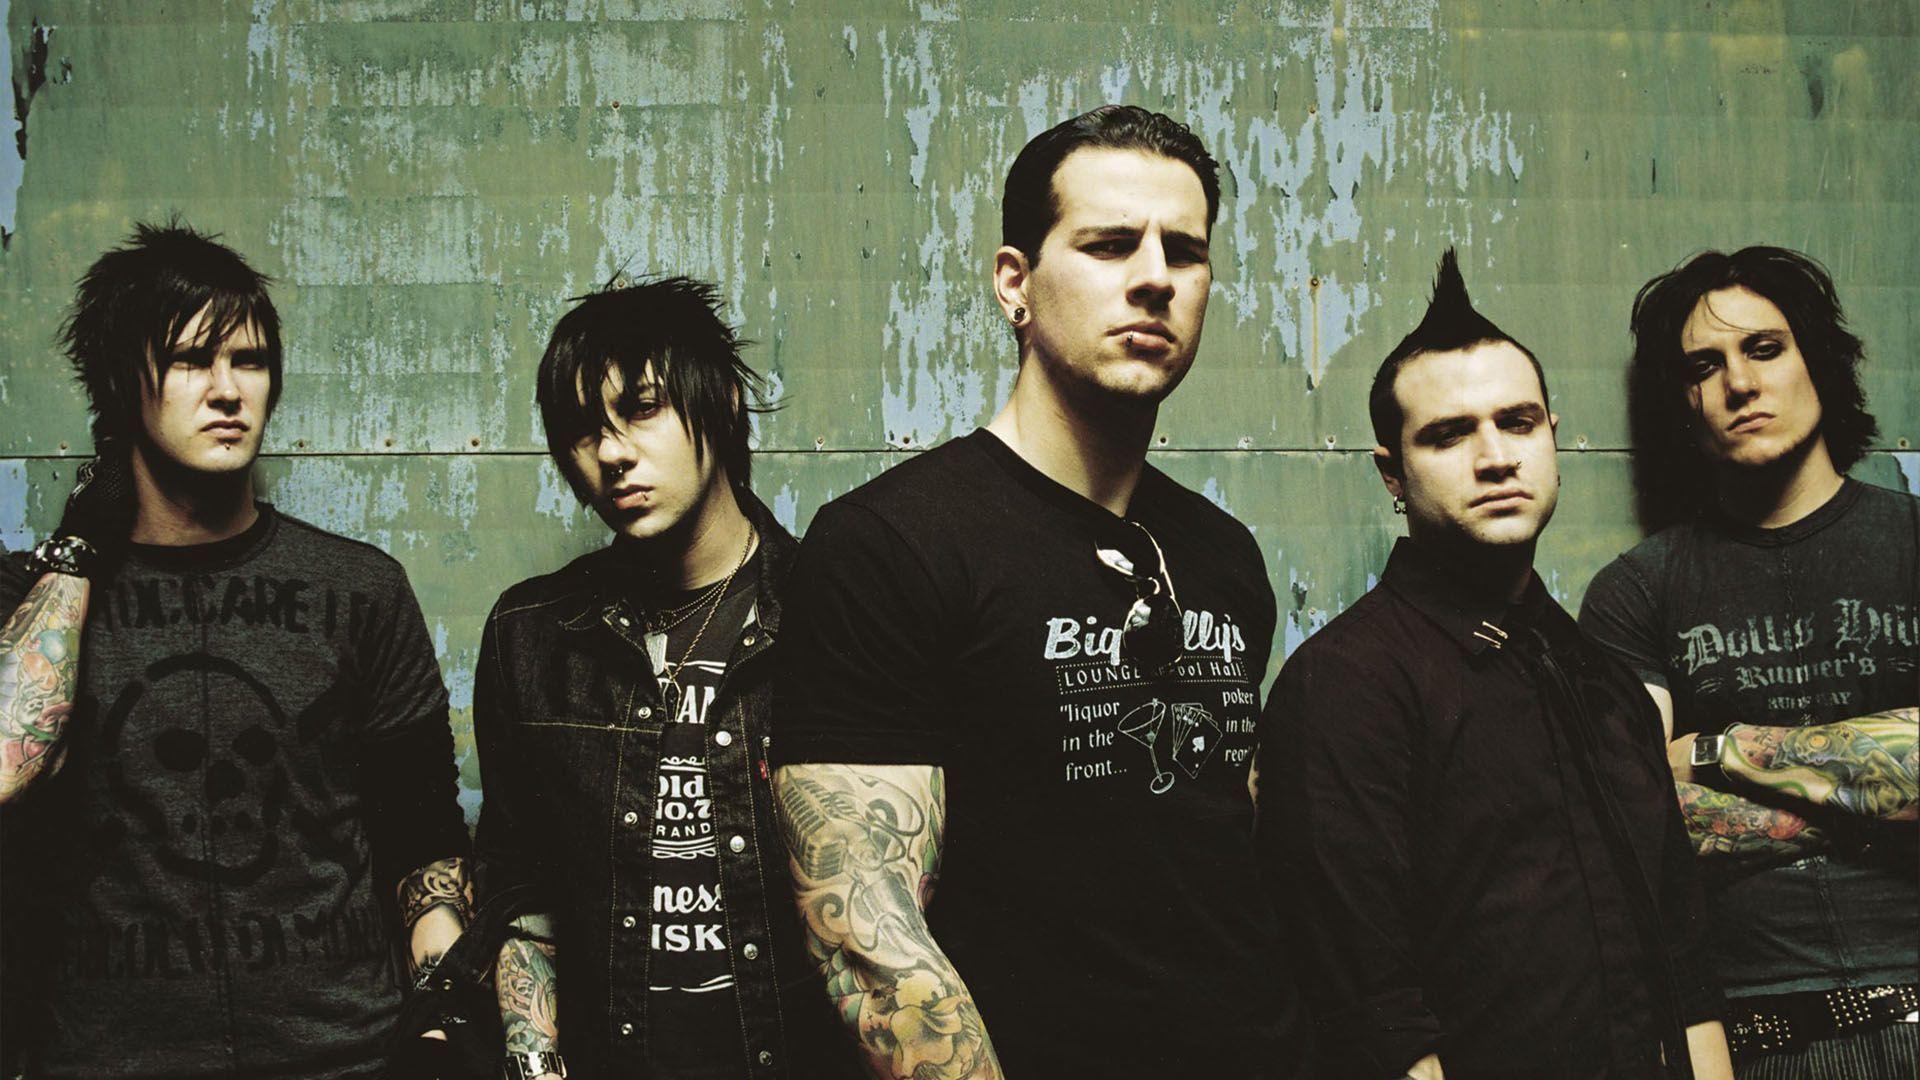 28 Avenged Sevenfold HD Wallpapers